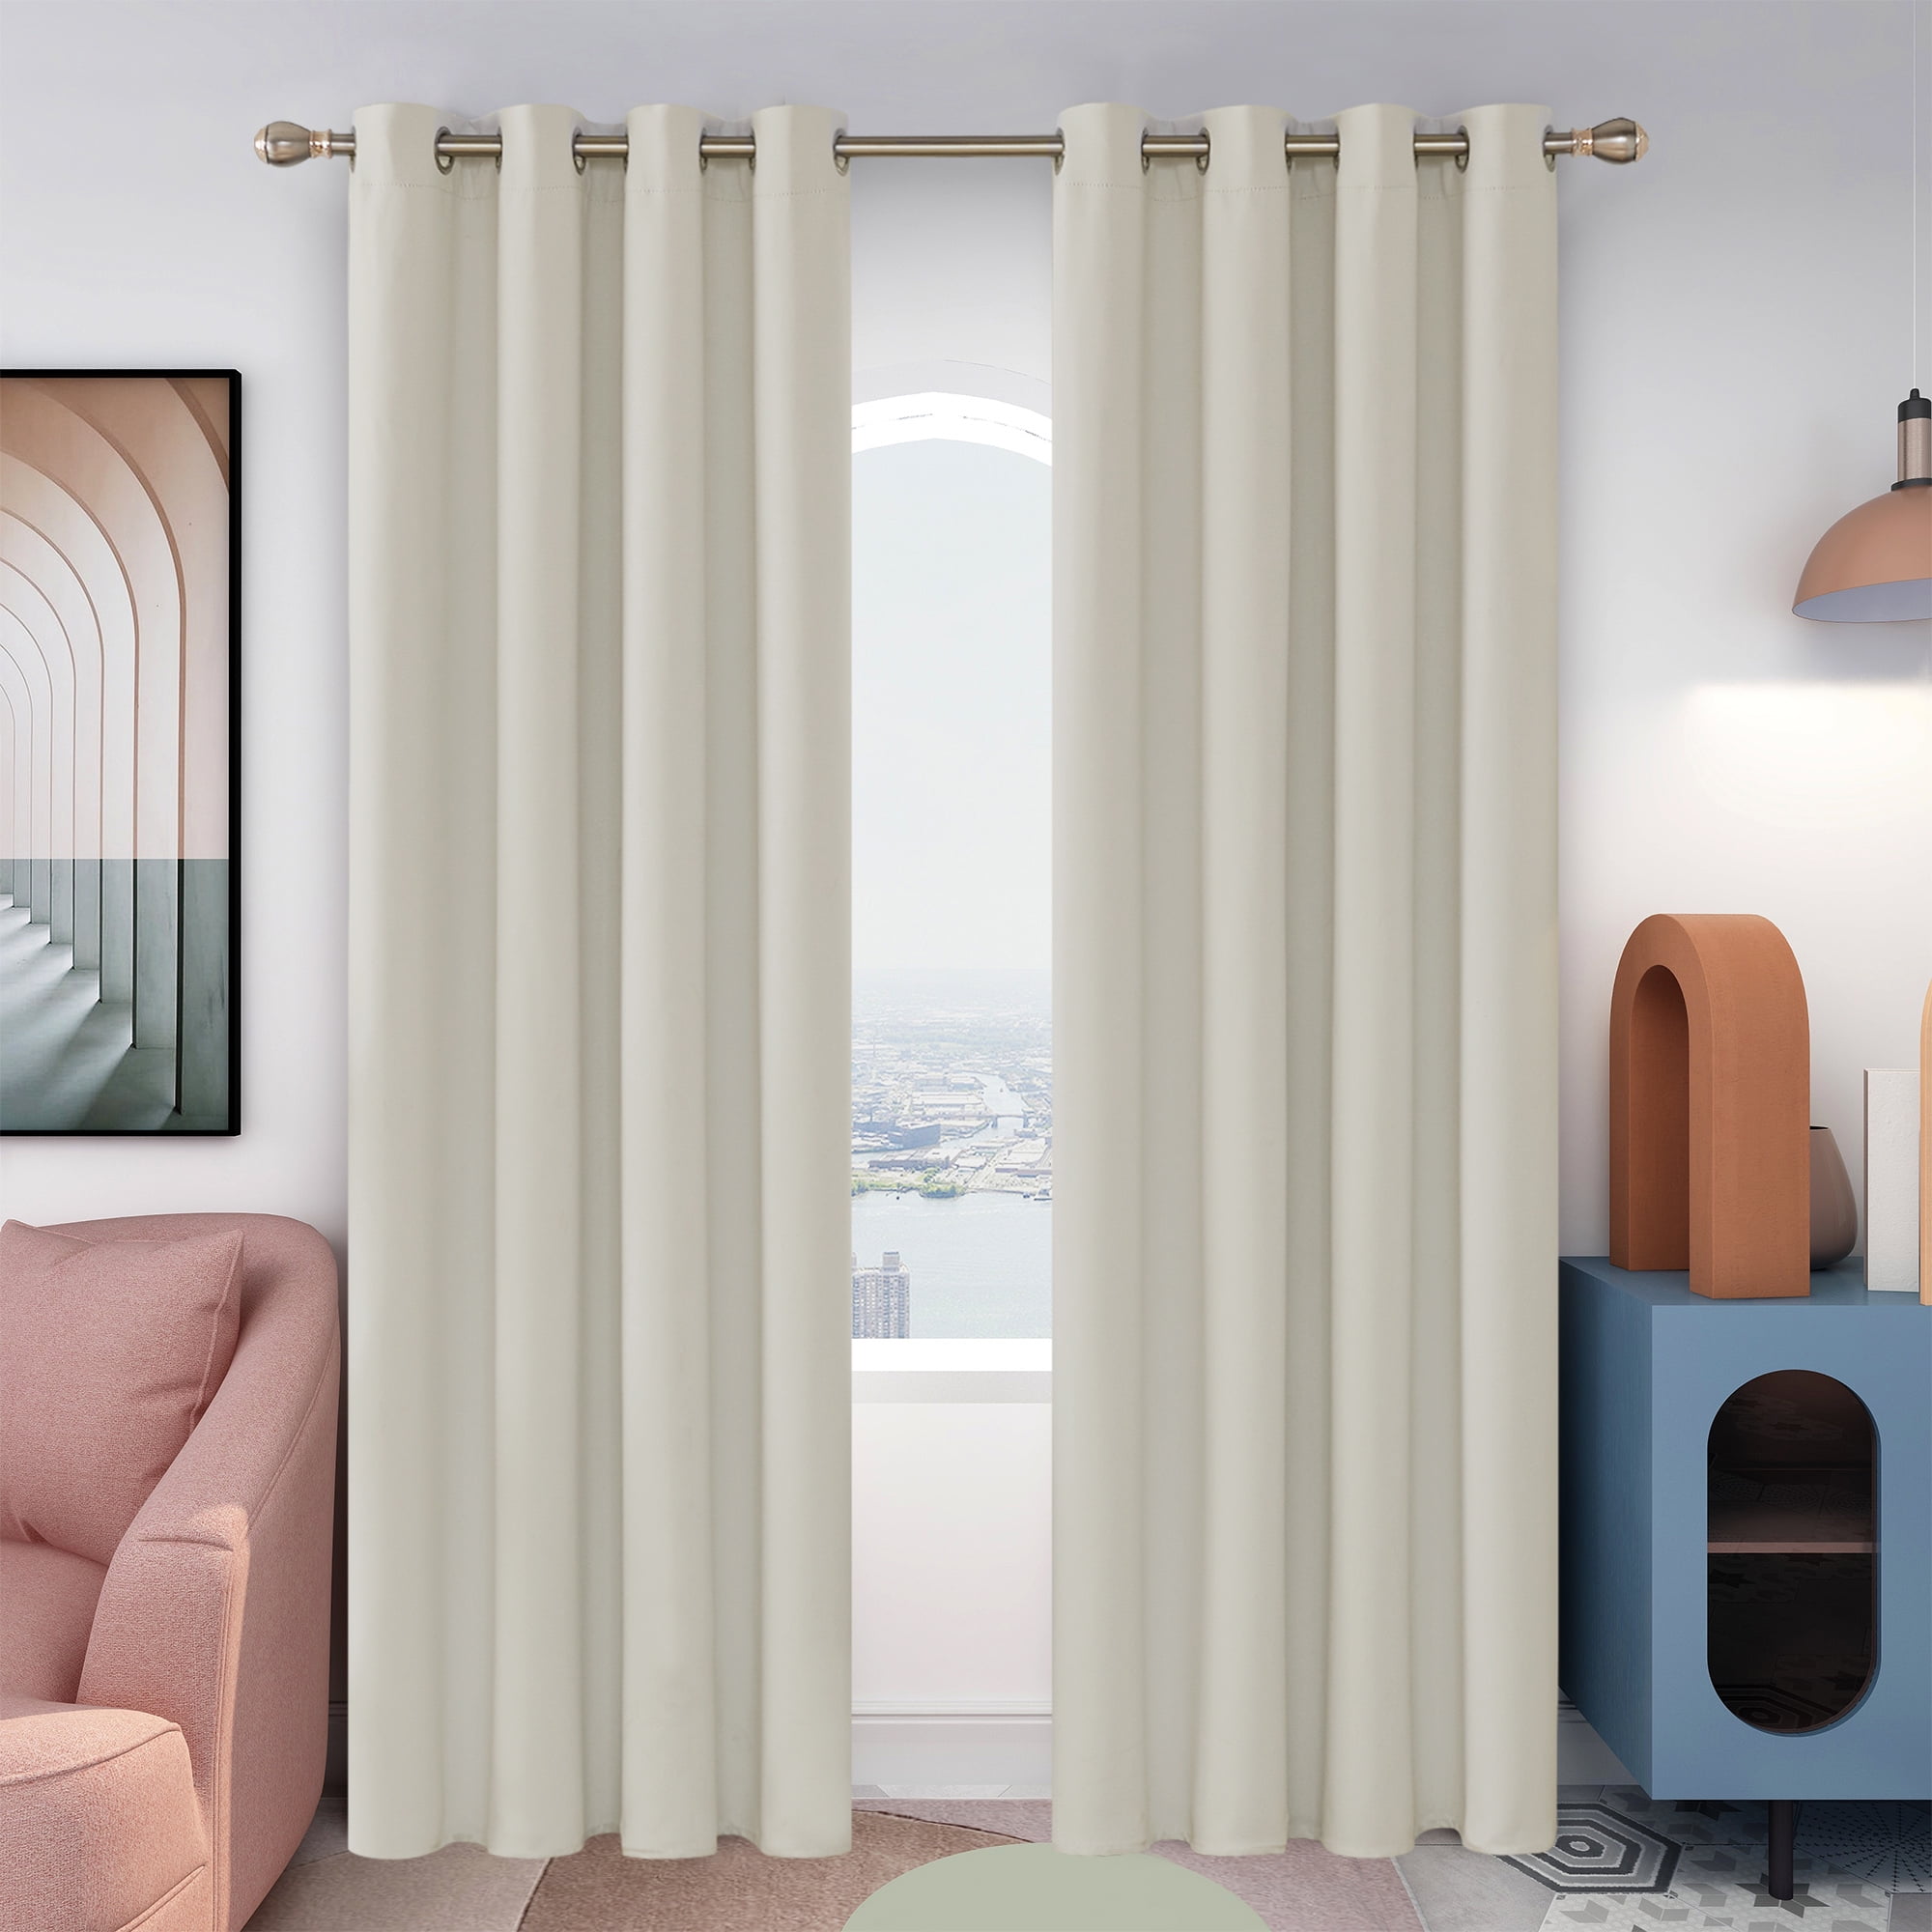 Blackout Curtains for Bedroom Thermal Insulated Room Darkening Curtains Beige 